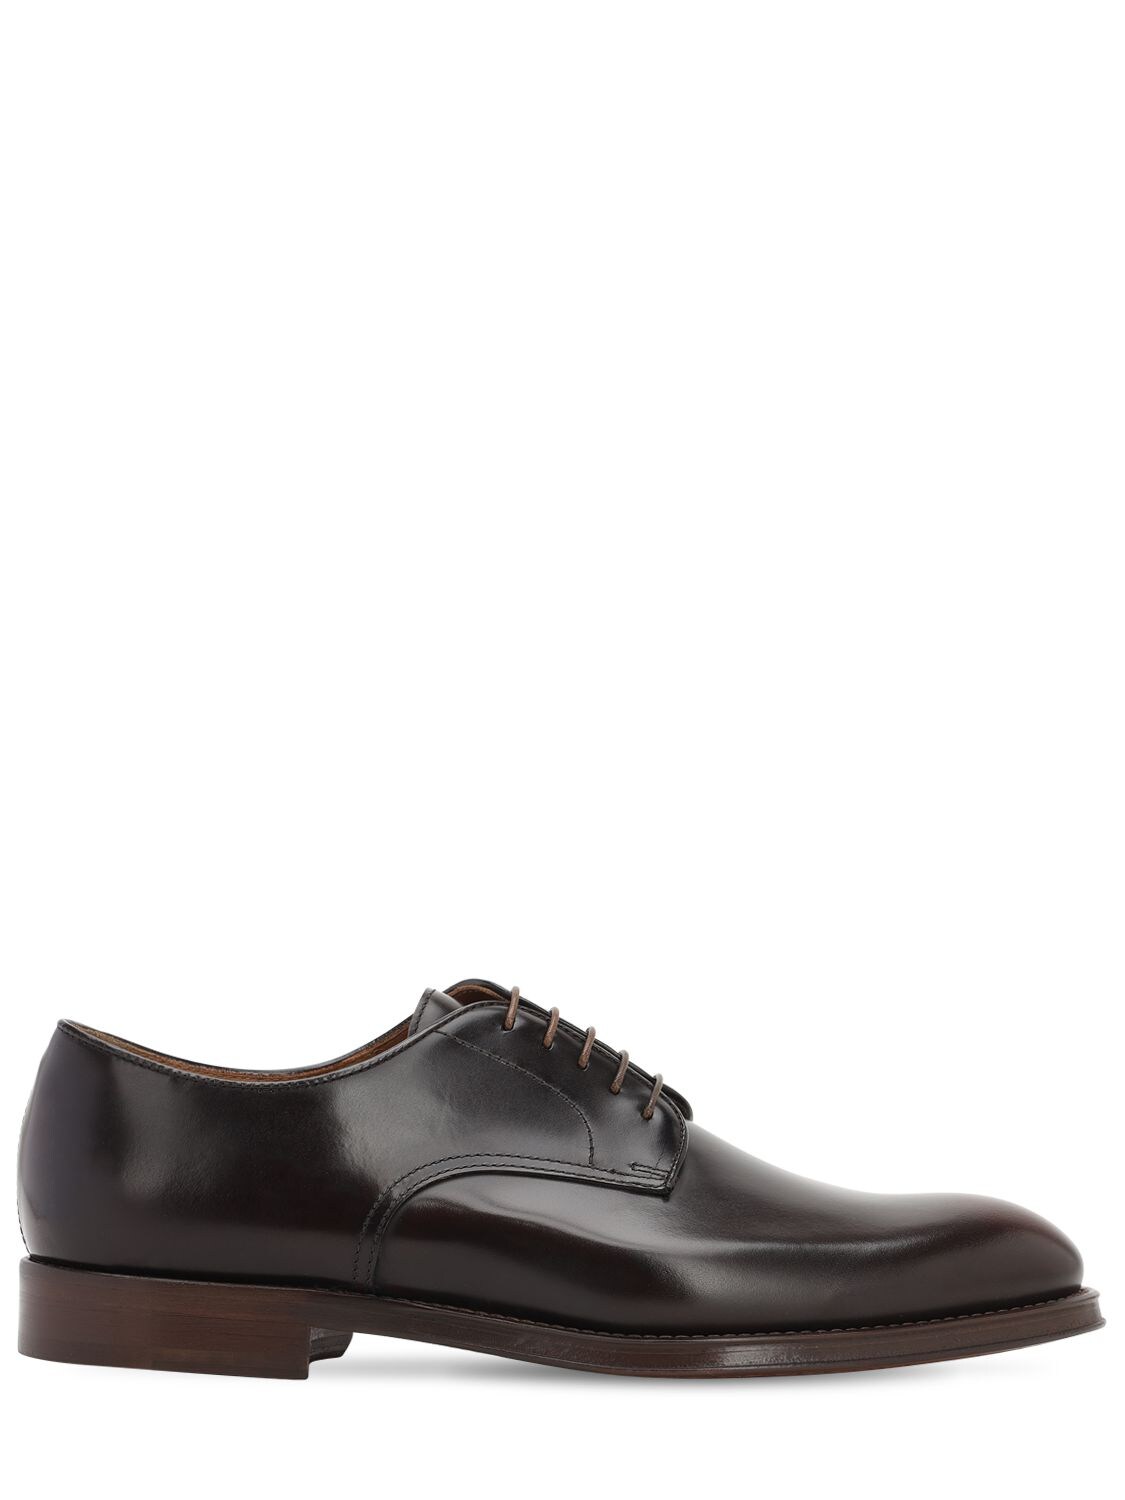 DOUCAL'S LEATHER DERBY SHOES,71IM89004-TU0WNA2